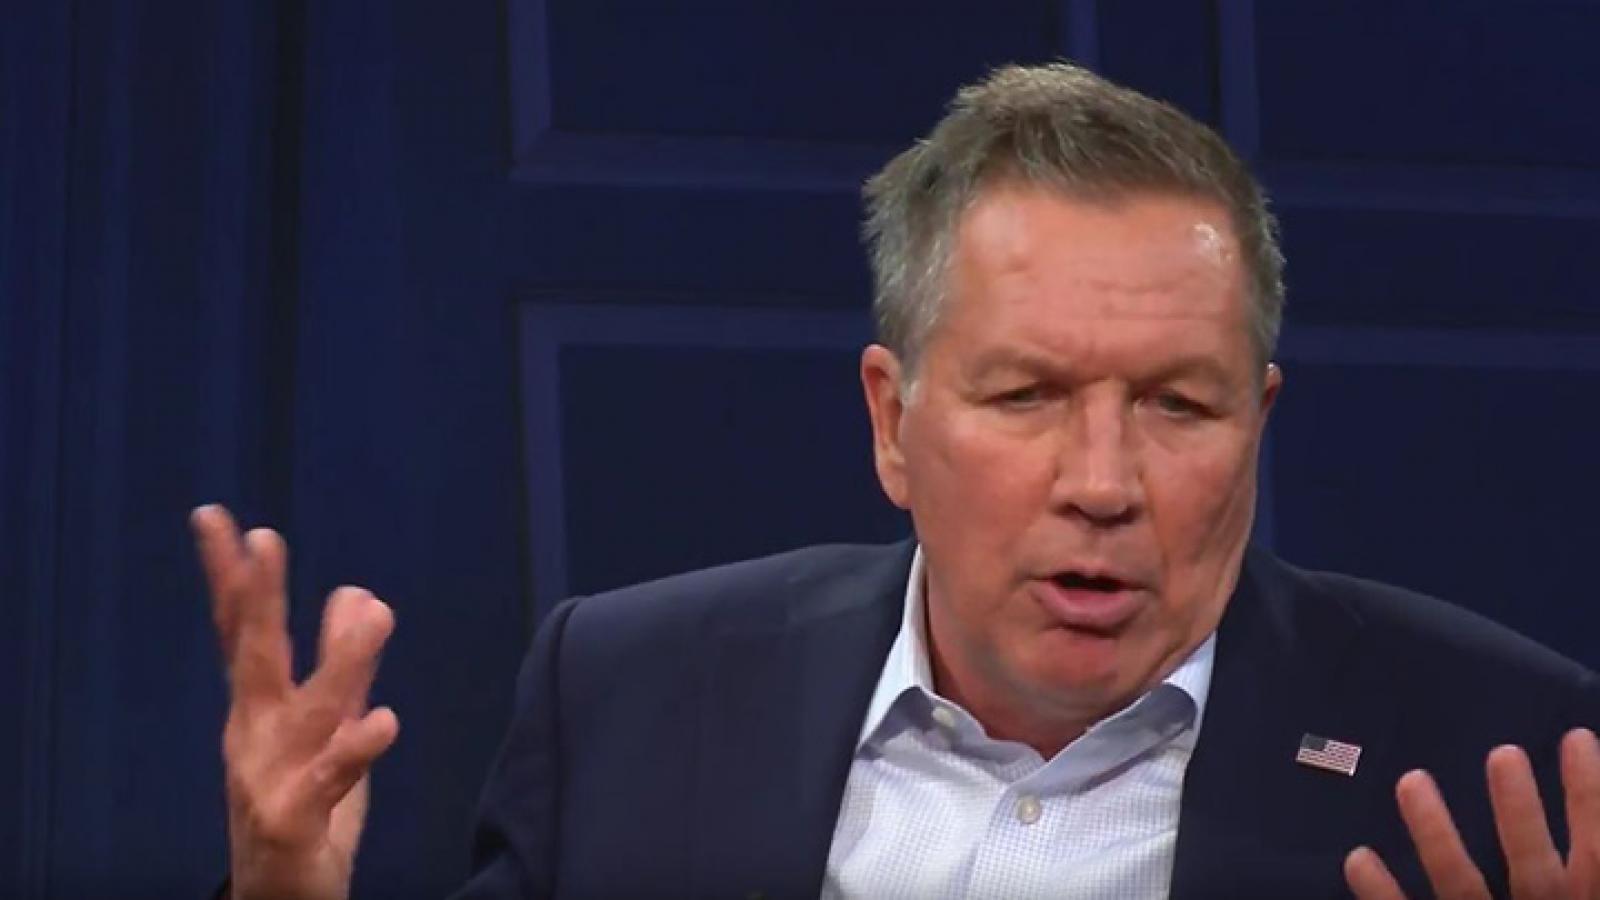 Ohio governor and Republican Party presidential candidate John Kasich takes questions from the American Forum studio audience